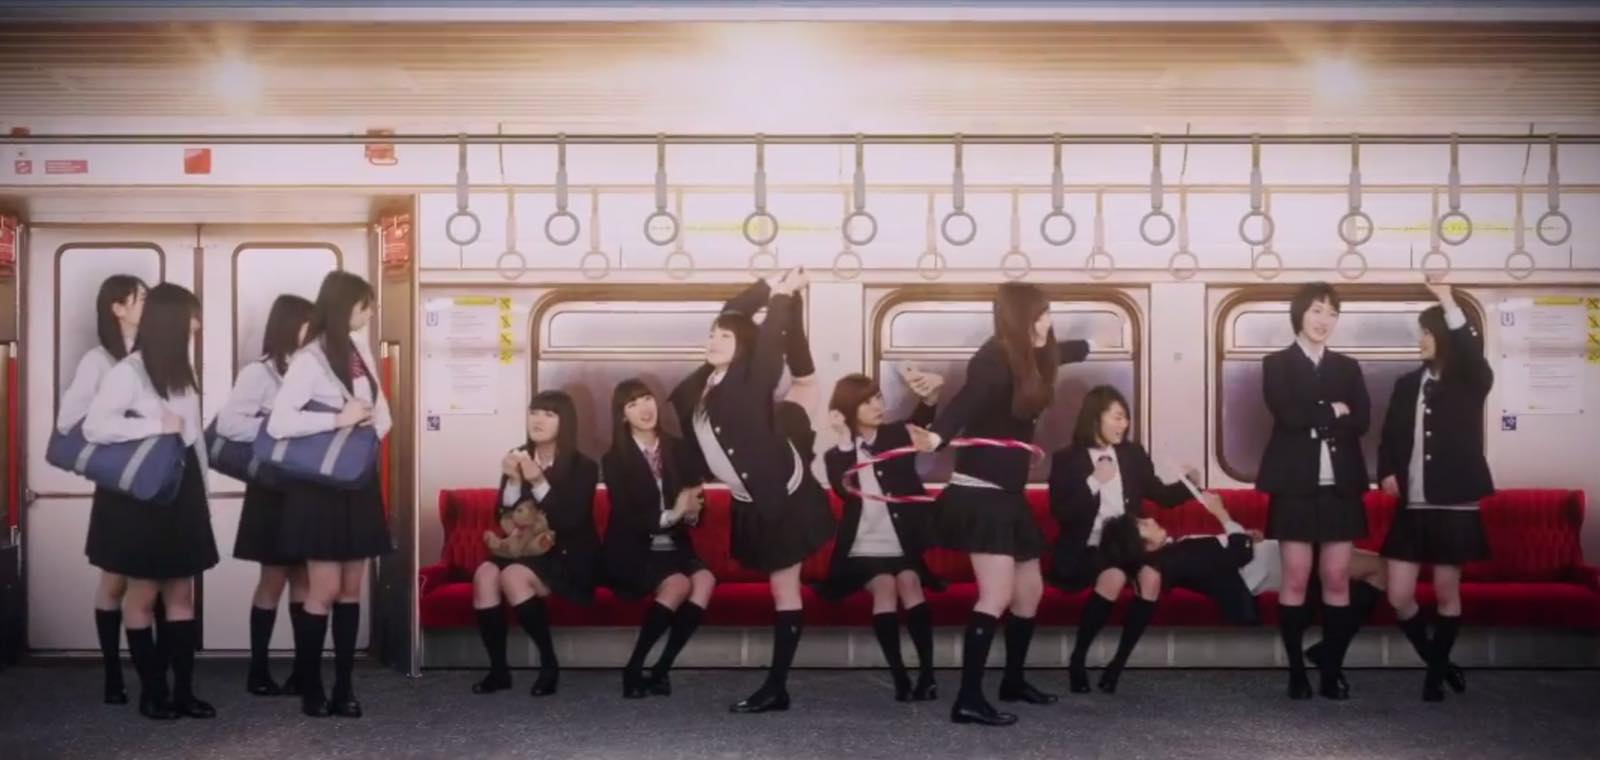 Symbolism, Fan Service and CG in Another Version of the MV for Morning Musume. ’15’s “Seishun Kozo ga Naiteiru”